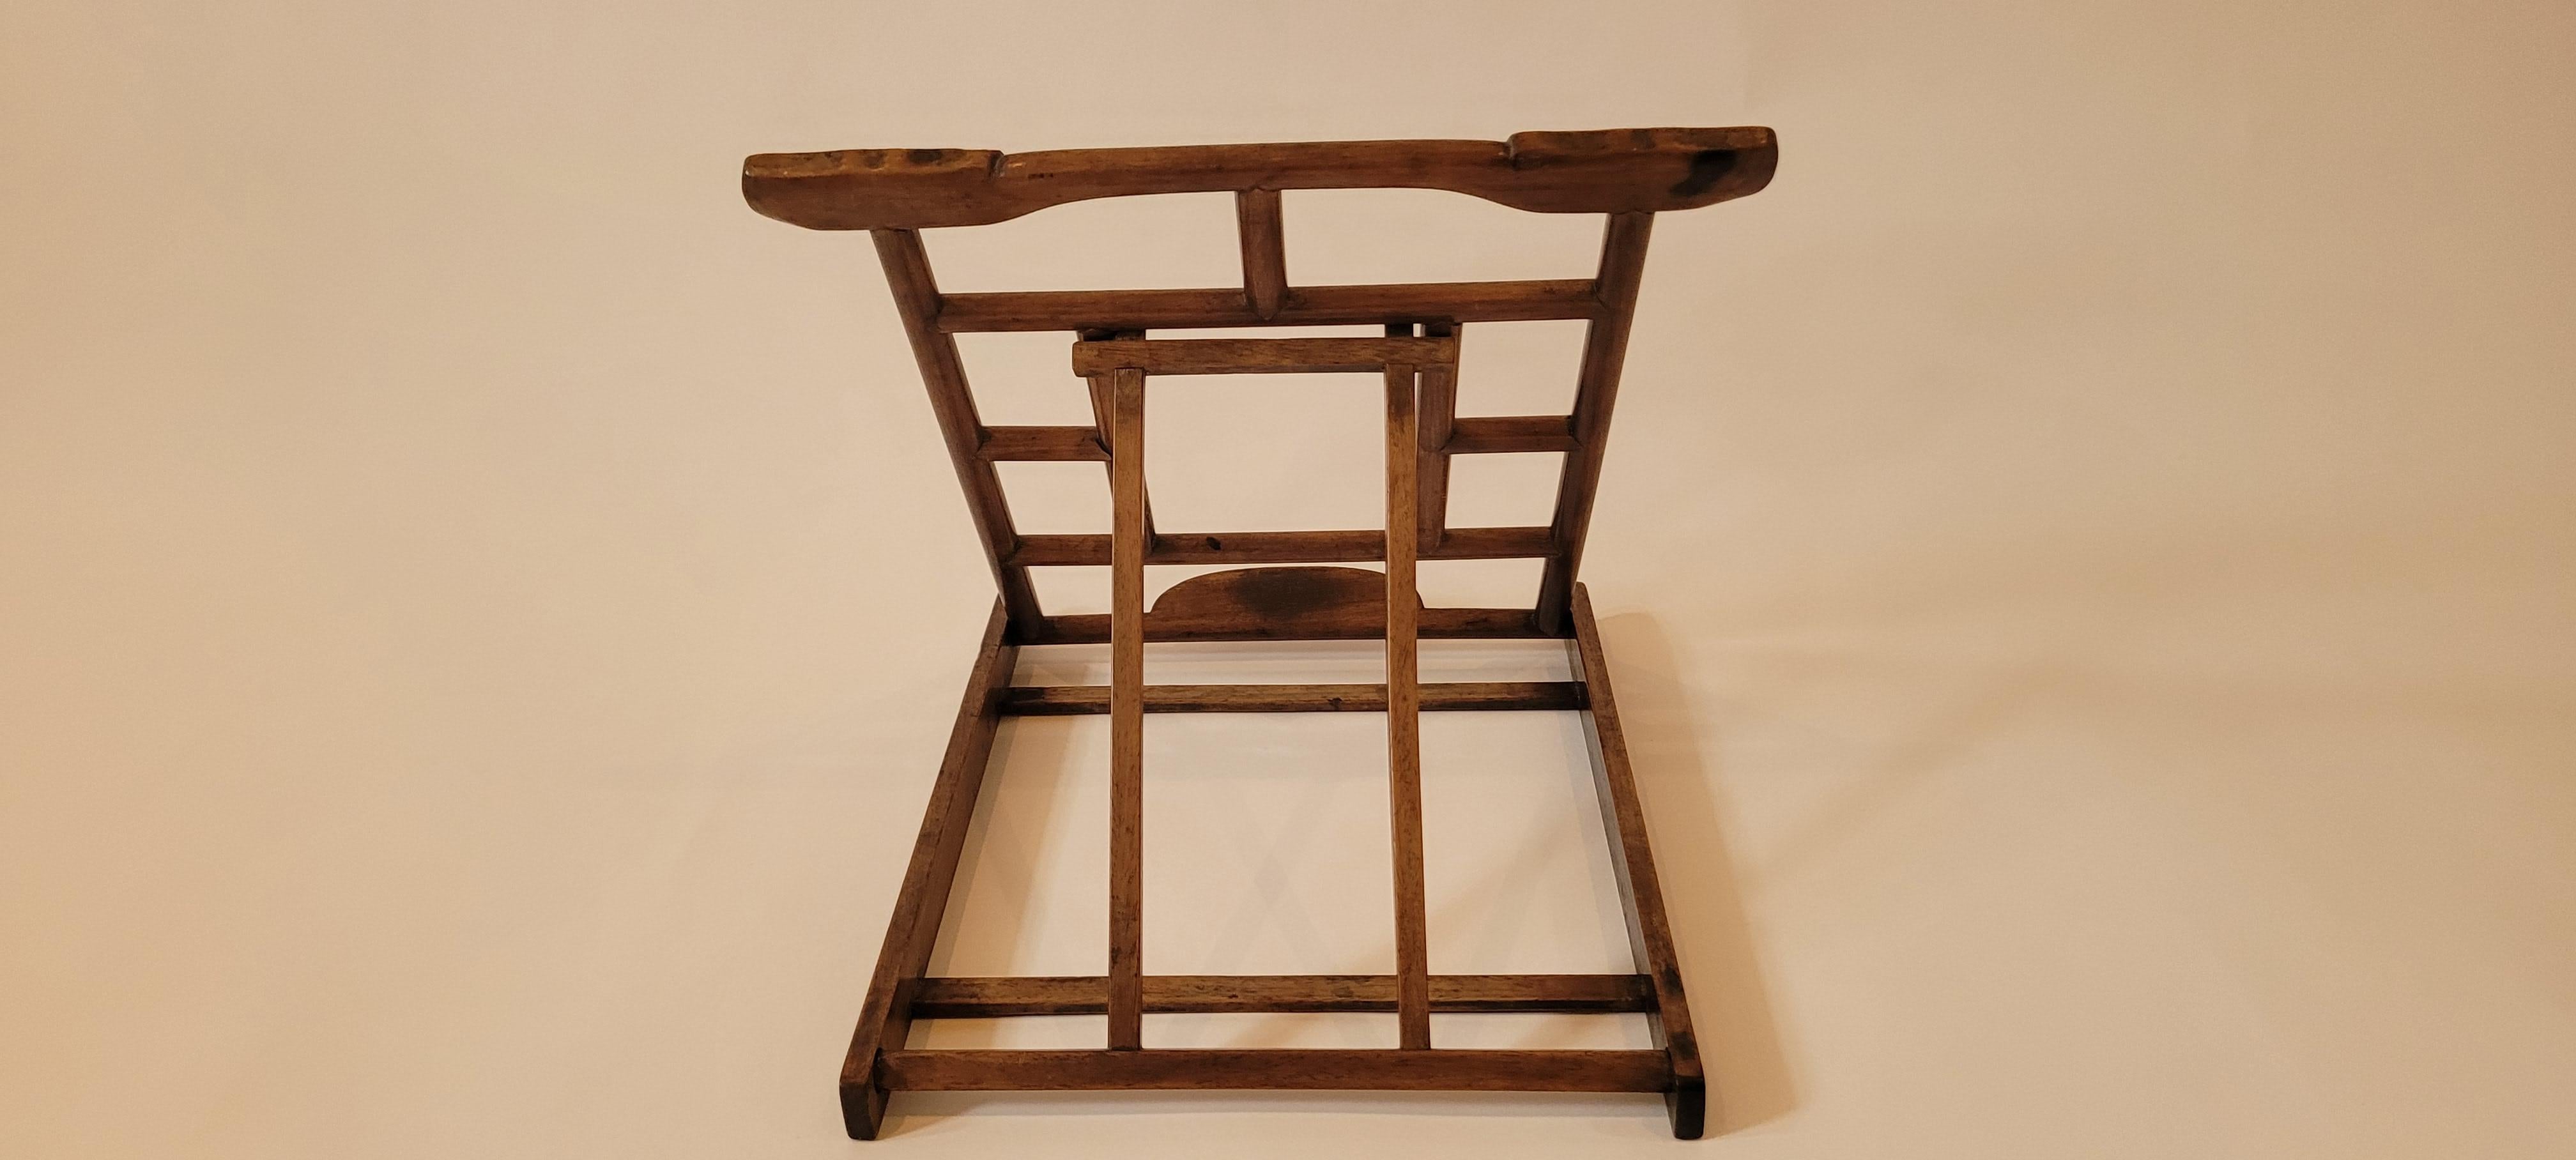 Ming 17th Century Huanghuali Book Stand For Sale